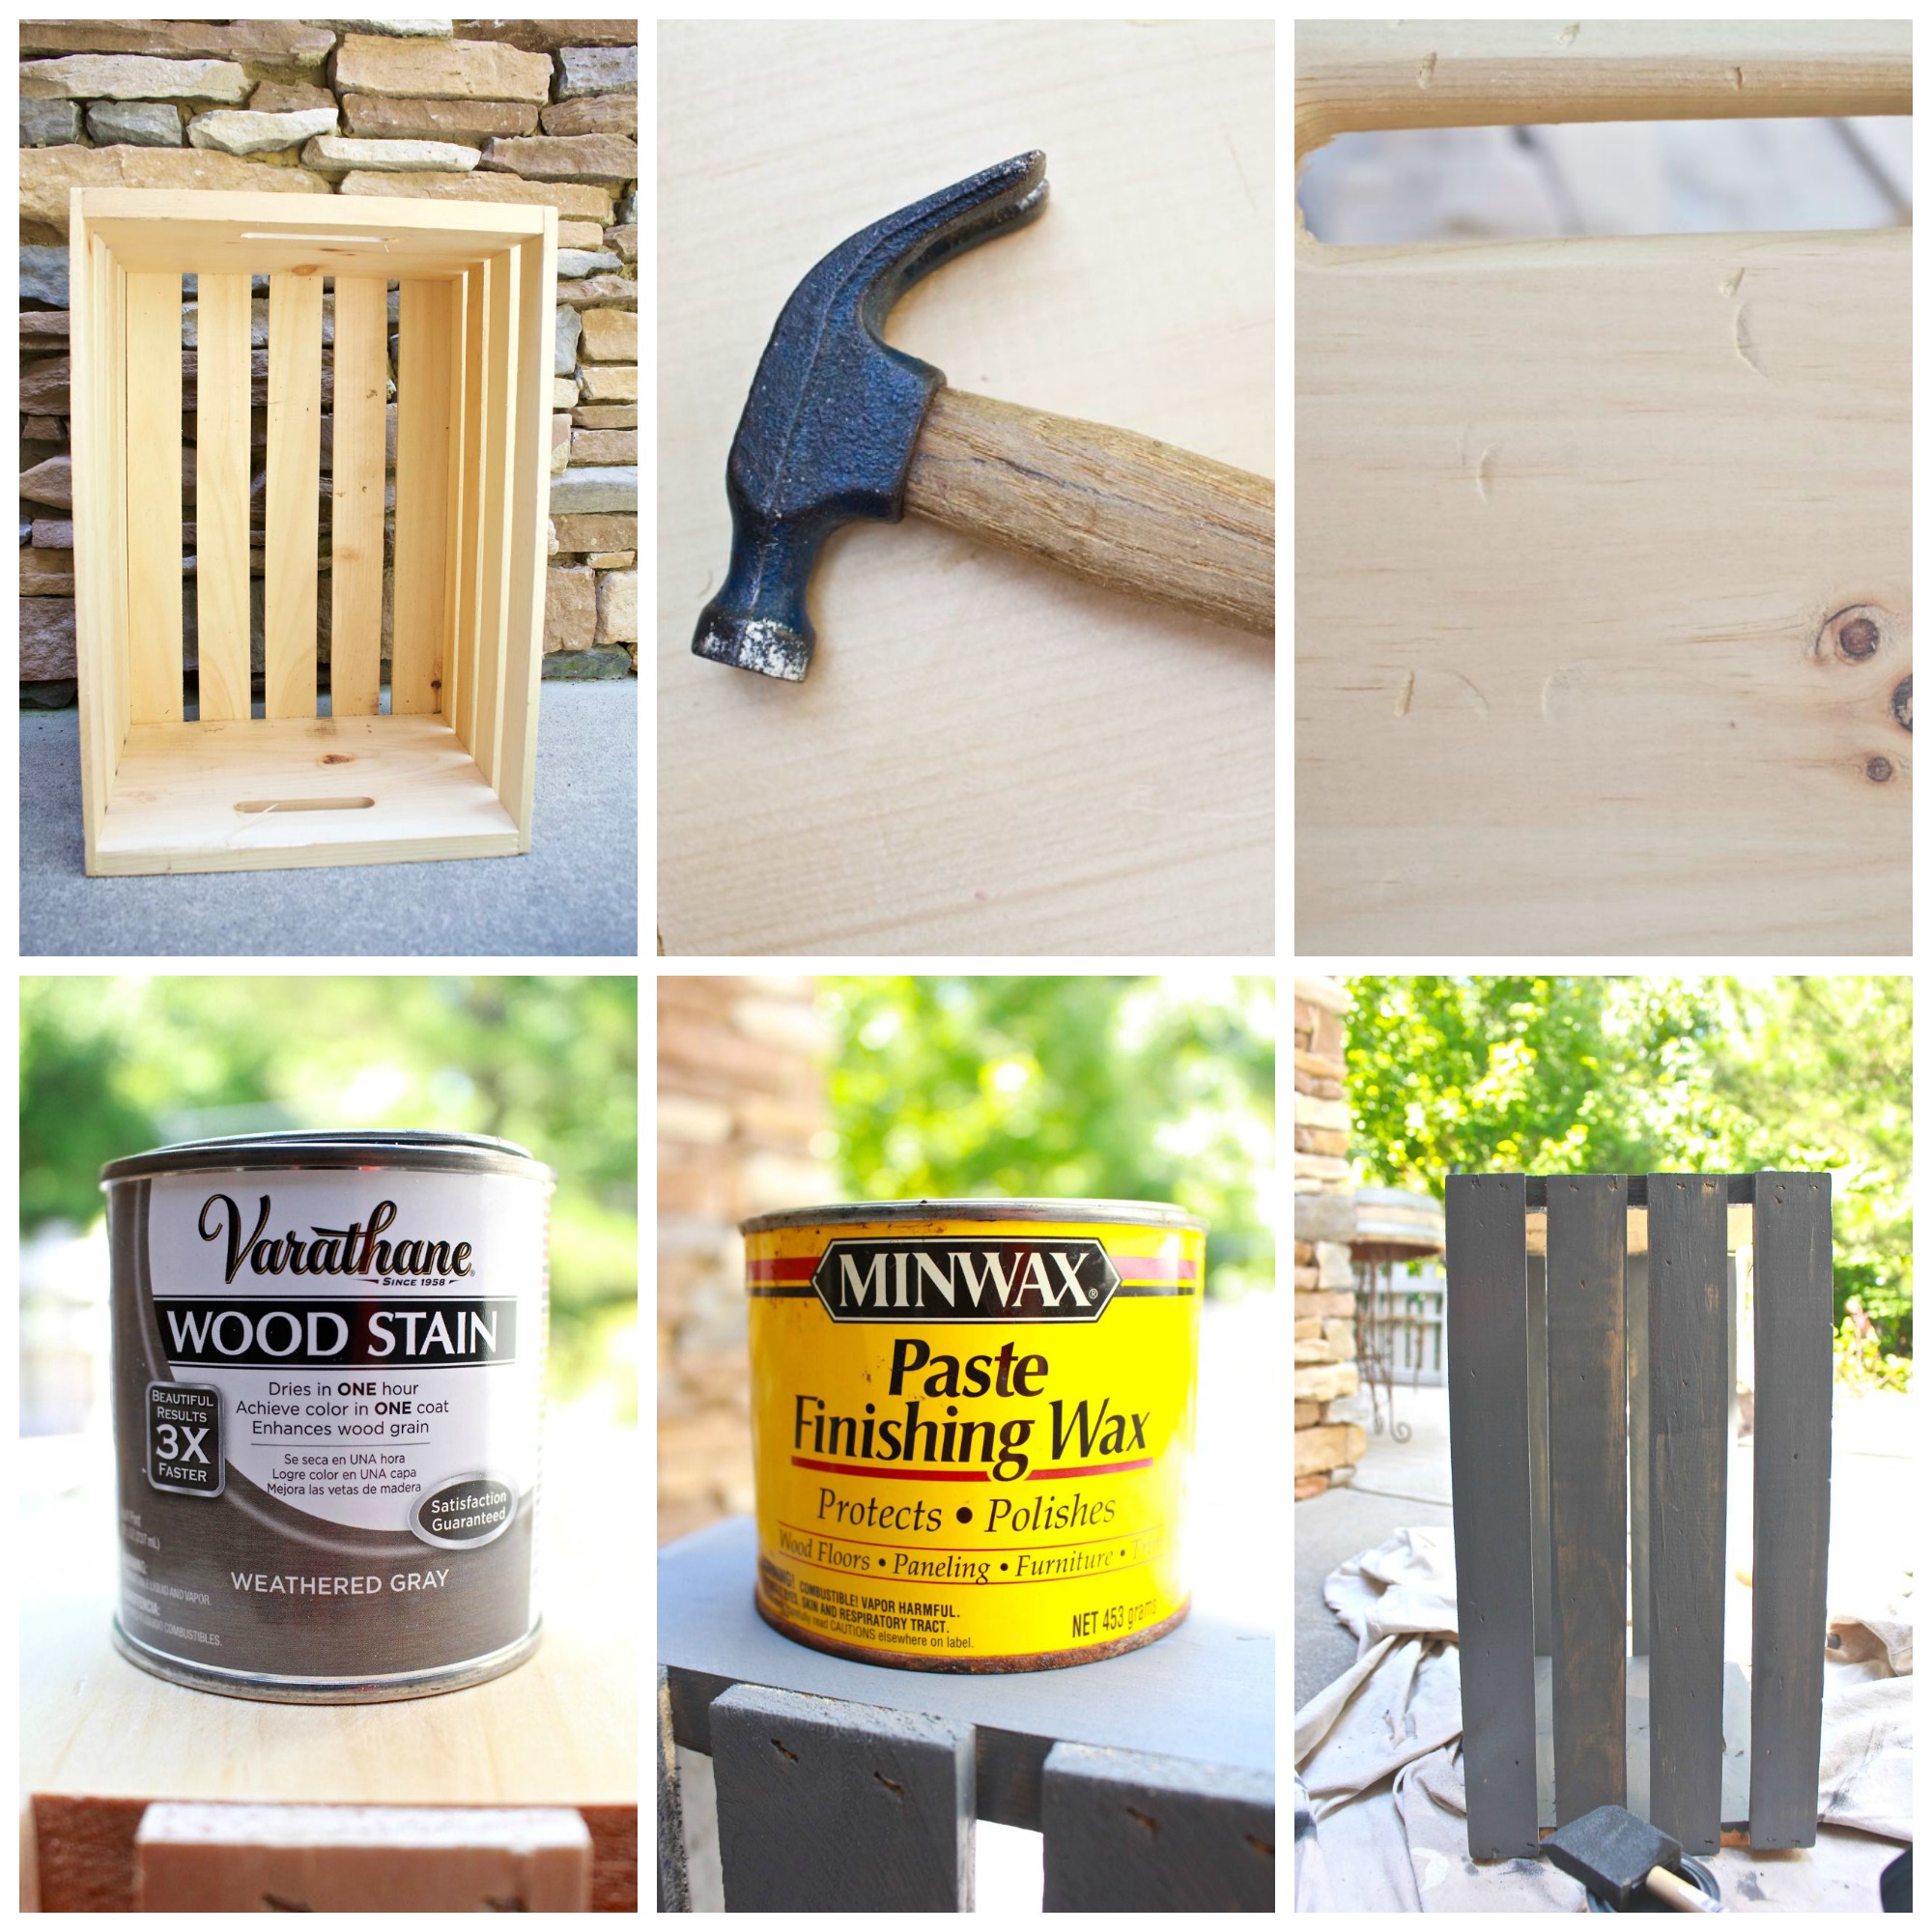 Wooden Crate Makeover